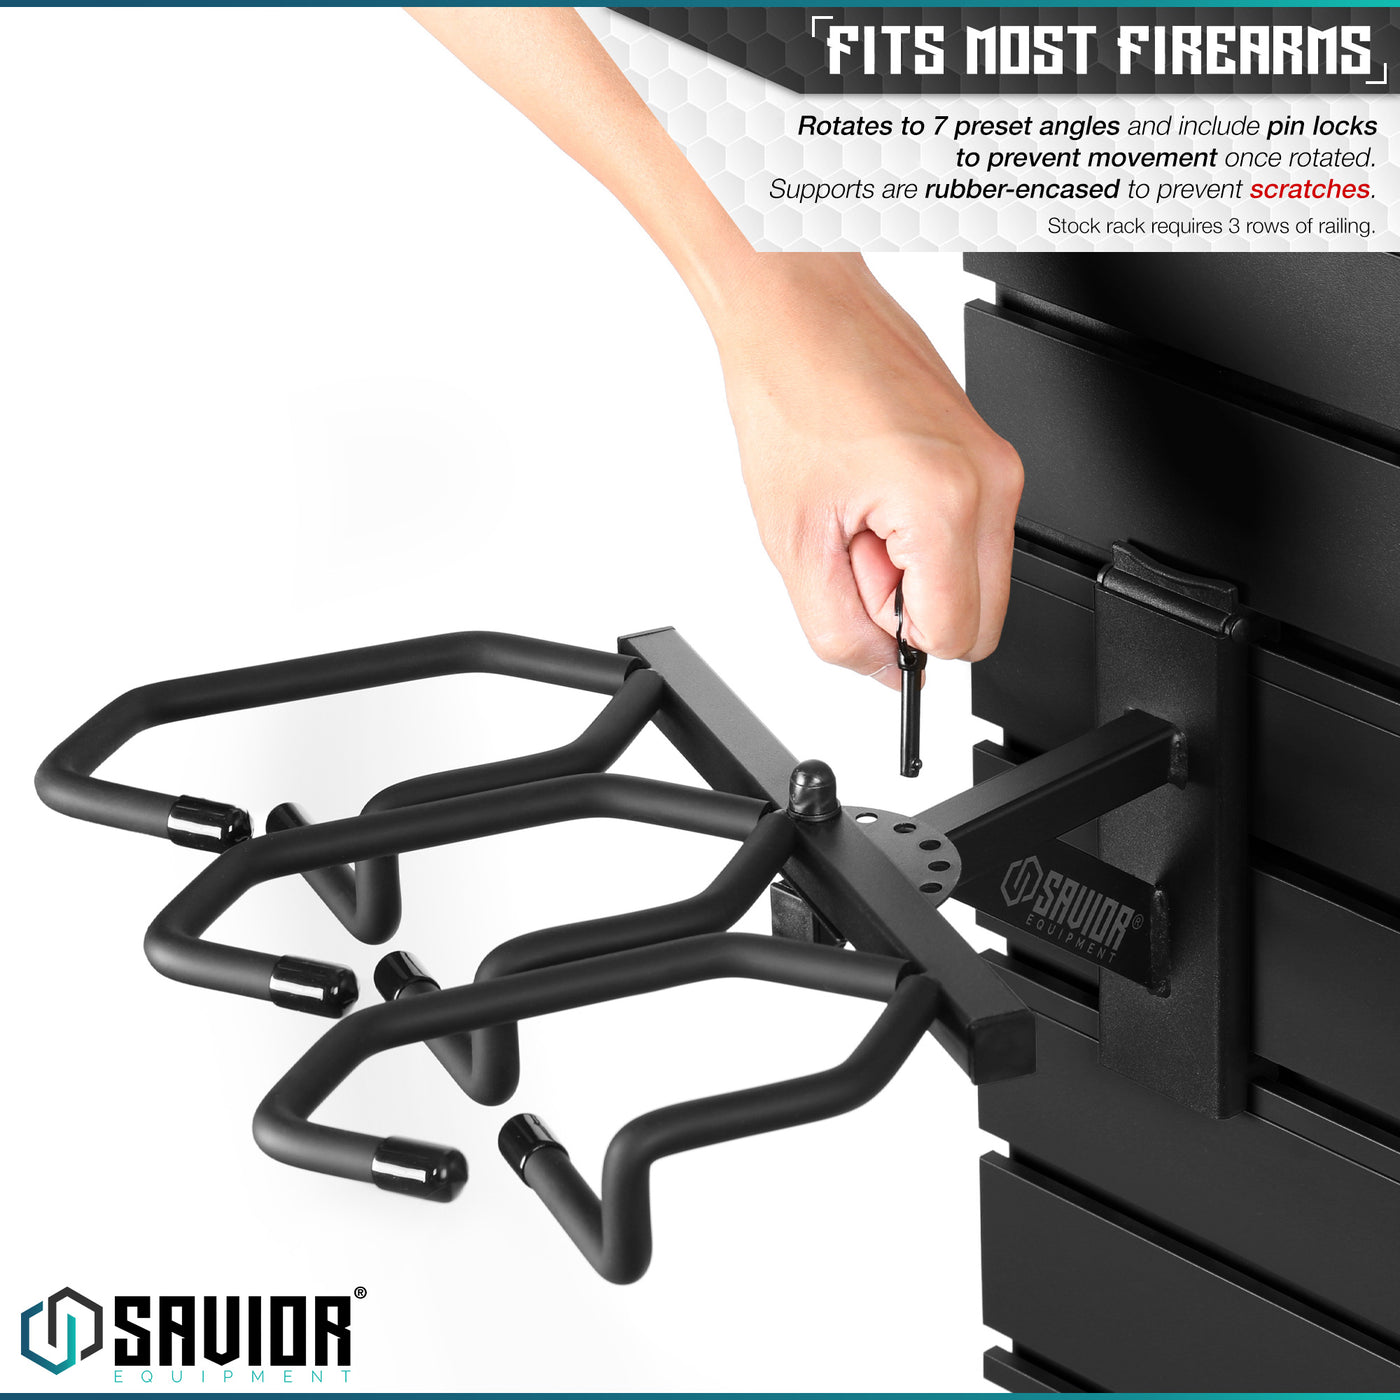 Fits Most Firearms - Rotates to 7 preset angles and include pin locks to prevent movement once rotated. Supports are rubber-encased to prevent scratches. Stock rack requires 3 rows of railing.